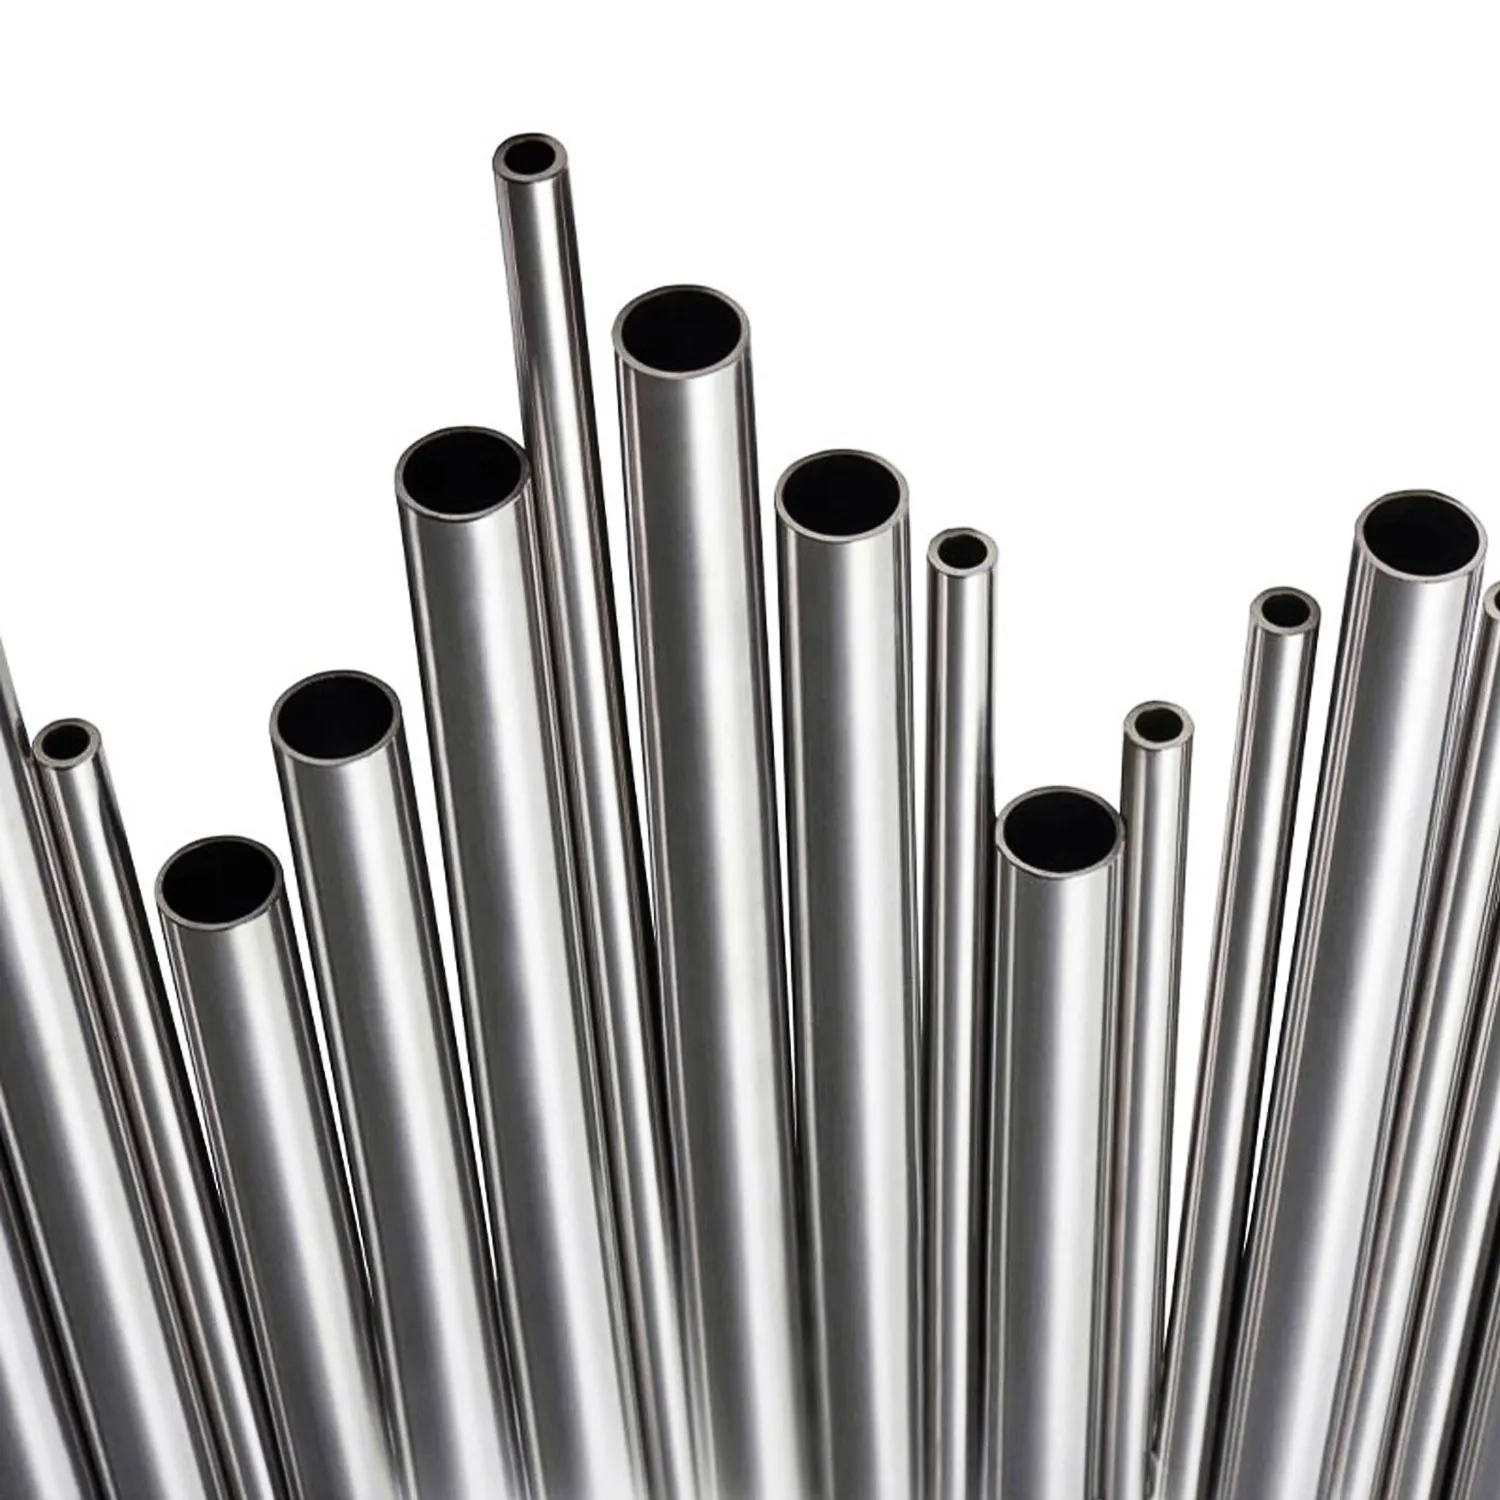 China Wholesale Factory Price Welding Stainless Steel Tube 306 Stainless Steel Pipe Stainless Steel Industrial Welded Pipe